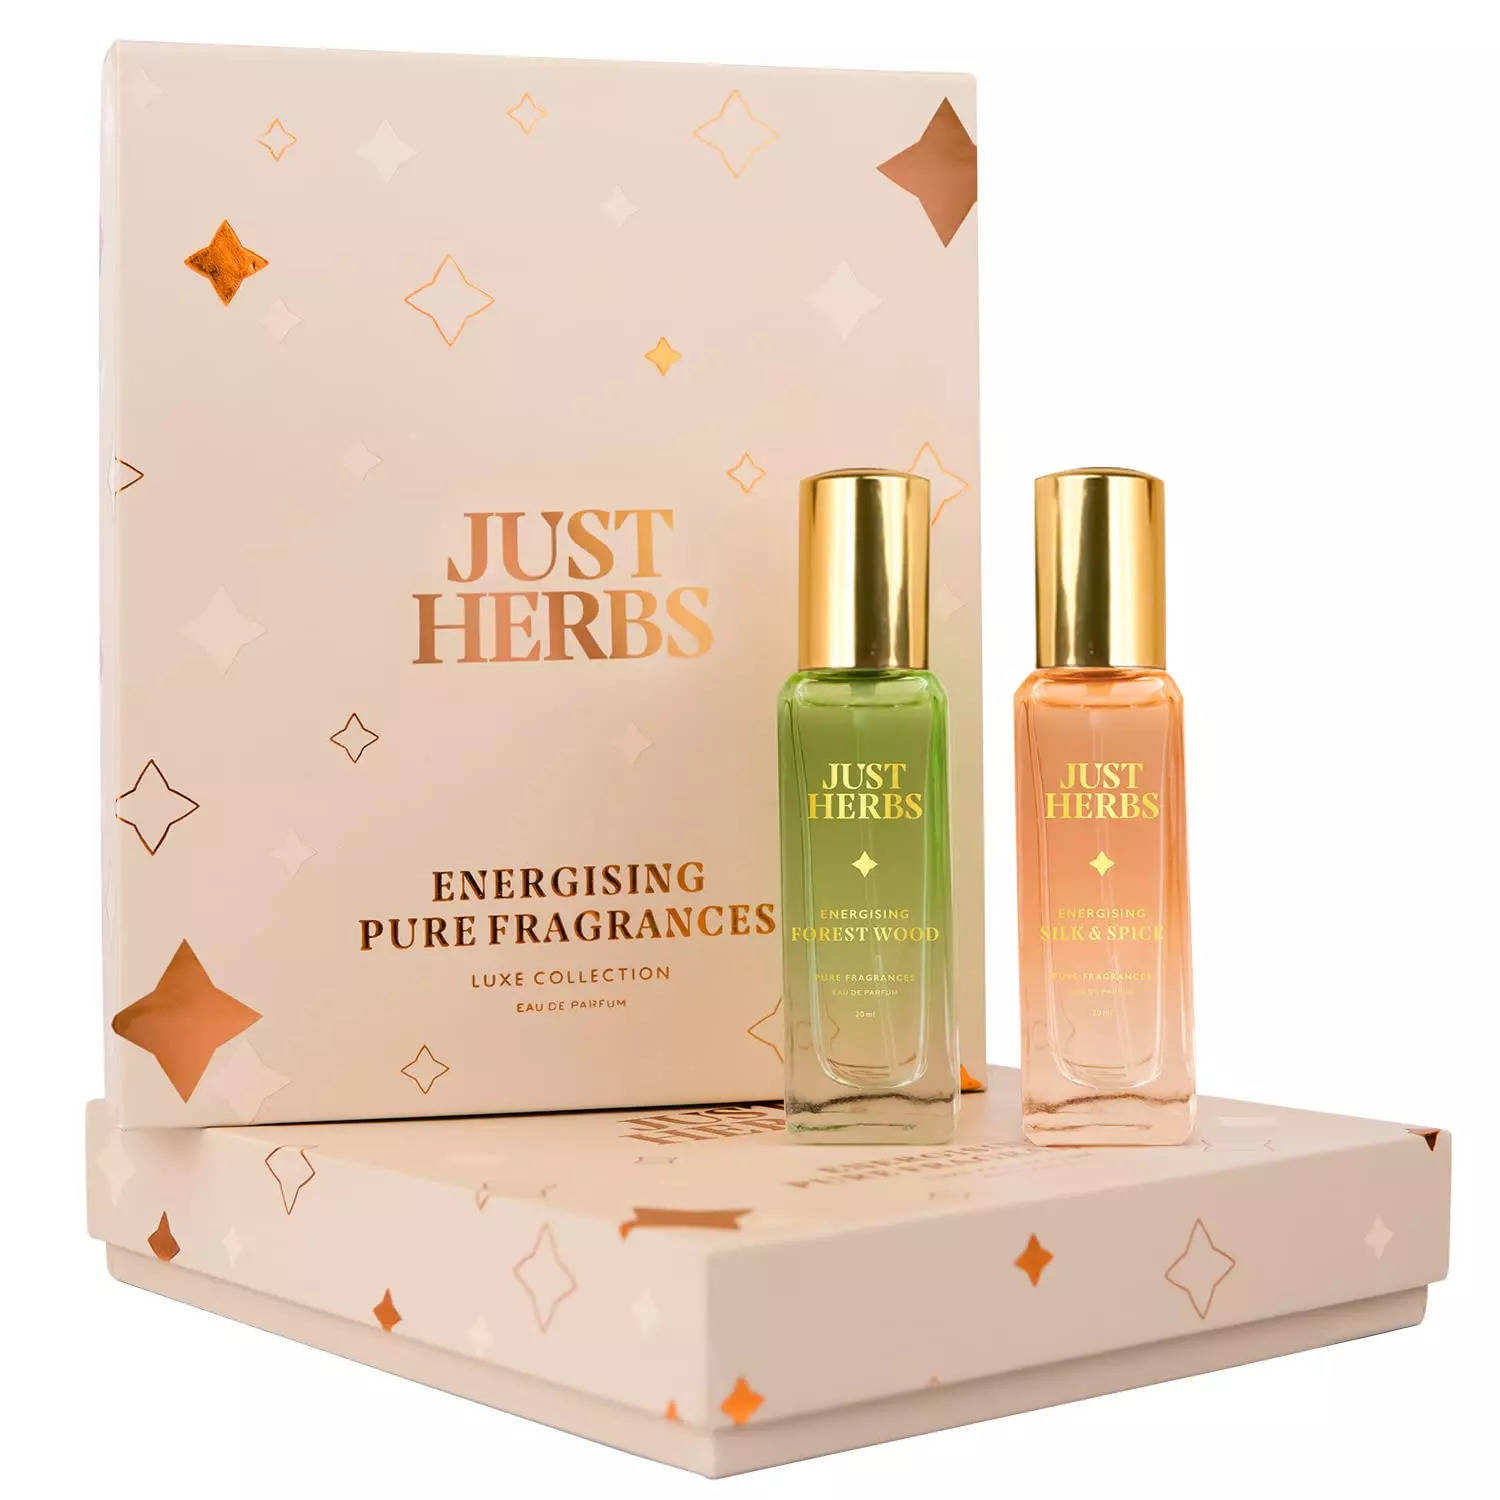 Buy Top Perfume Gift Sets for Women Online in India Under ₹600 I